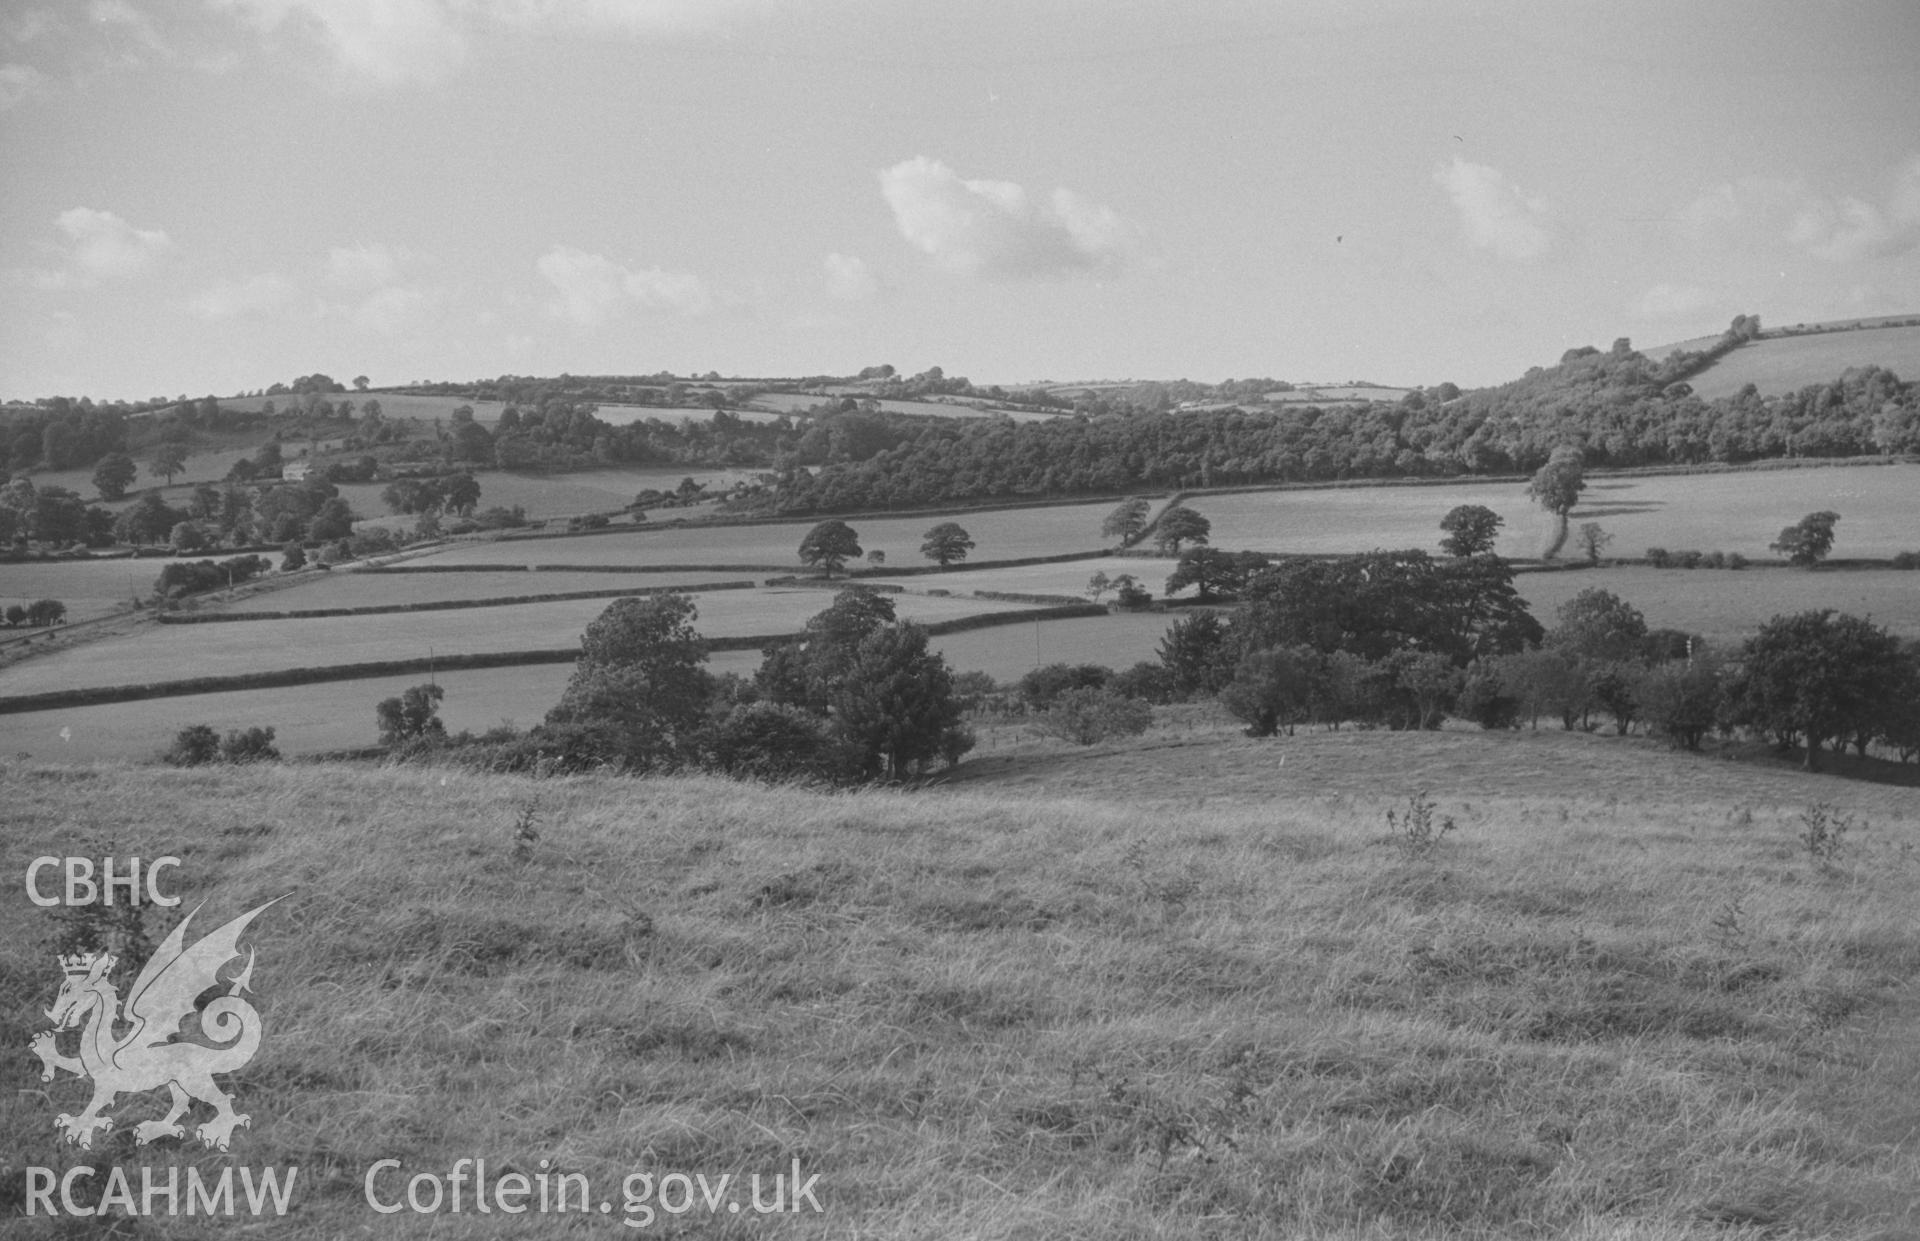 Digital copy of a black and white negative showing panoramic view of Glan Denys, Derry Ormond Monument, Dulas valley and woods by Castell Goetre. Photographed by Arthur O. Chater on 4th September 1966 from Grid Reference SN 591 505. (Photograph 5 of 6).